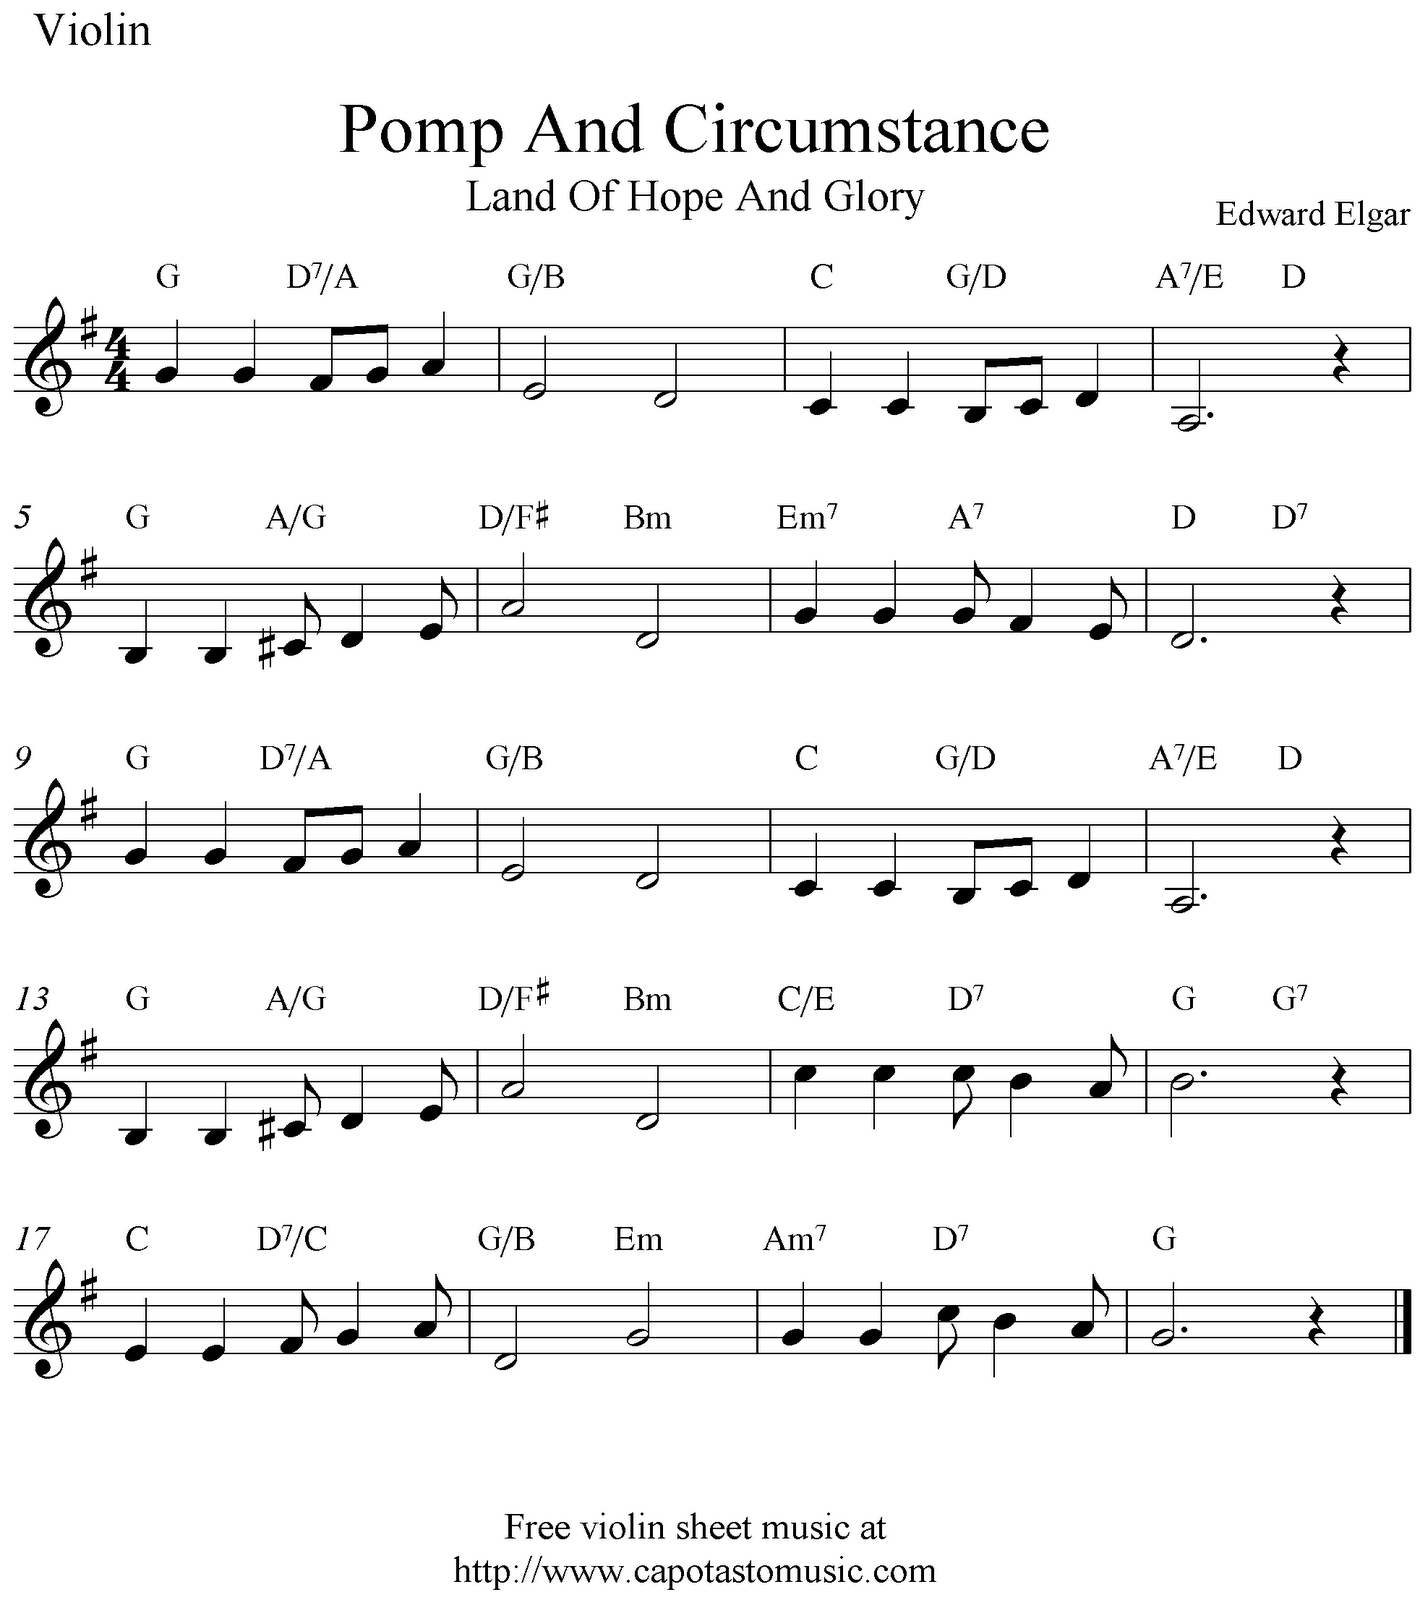 Free Sheet Music Scores: Pomp And Circumstance (Land Of Hope And - Free Printable Sheet Music Pomp And Circumstance